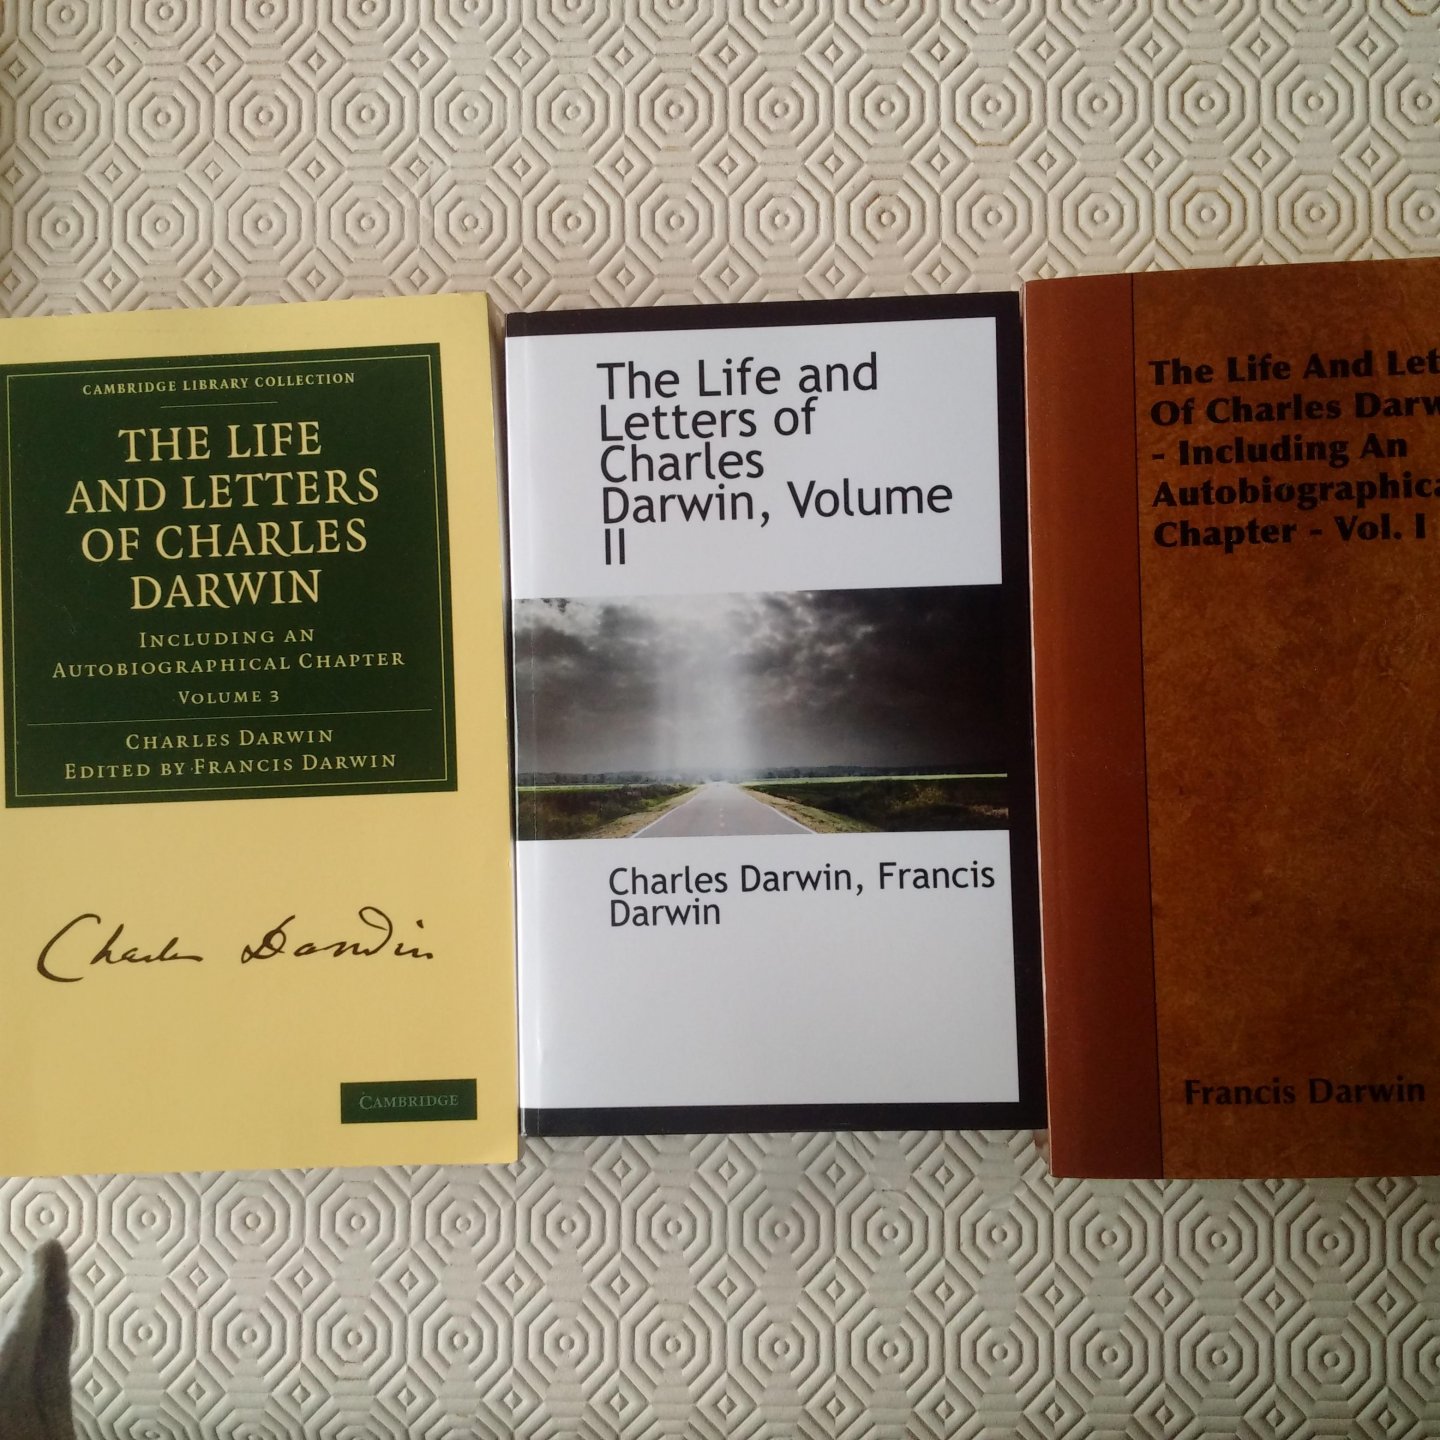 Darwin, Francis - The Life and Letters of Charles Darwin. Including an Autobiographical Chapter. Volume I II en III